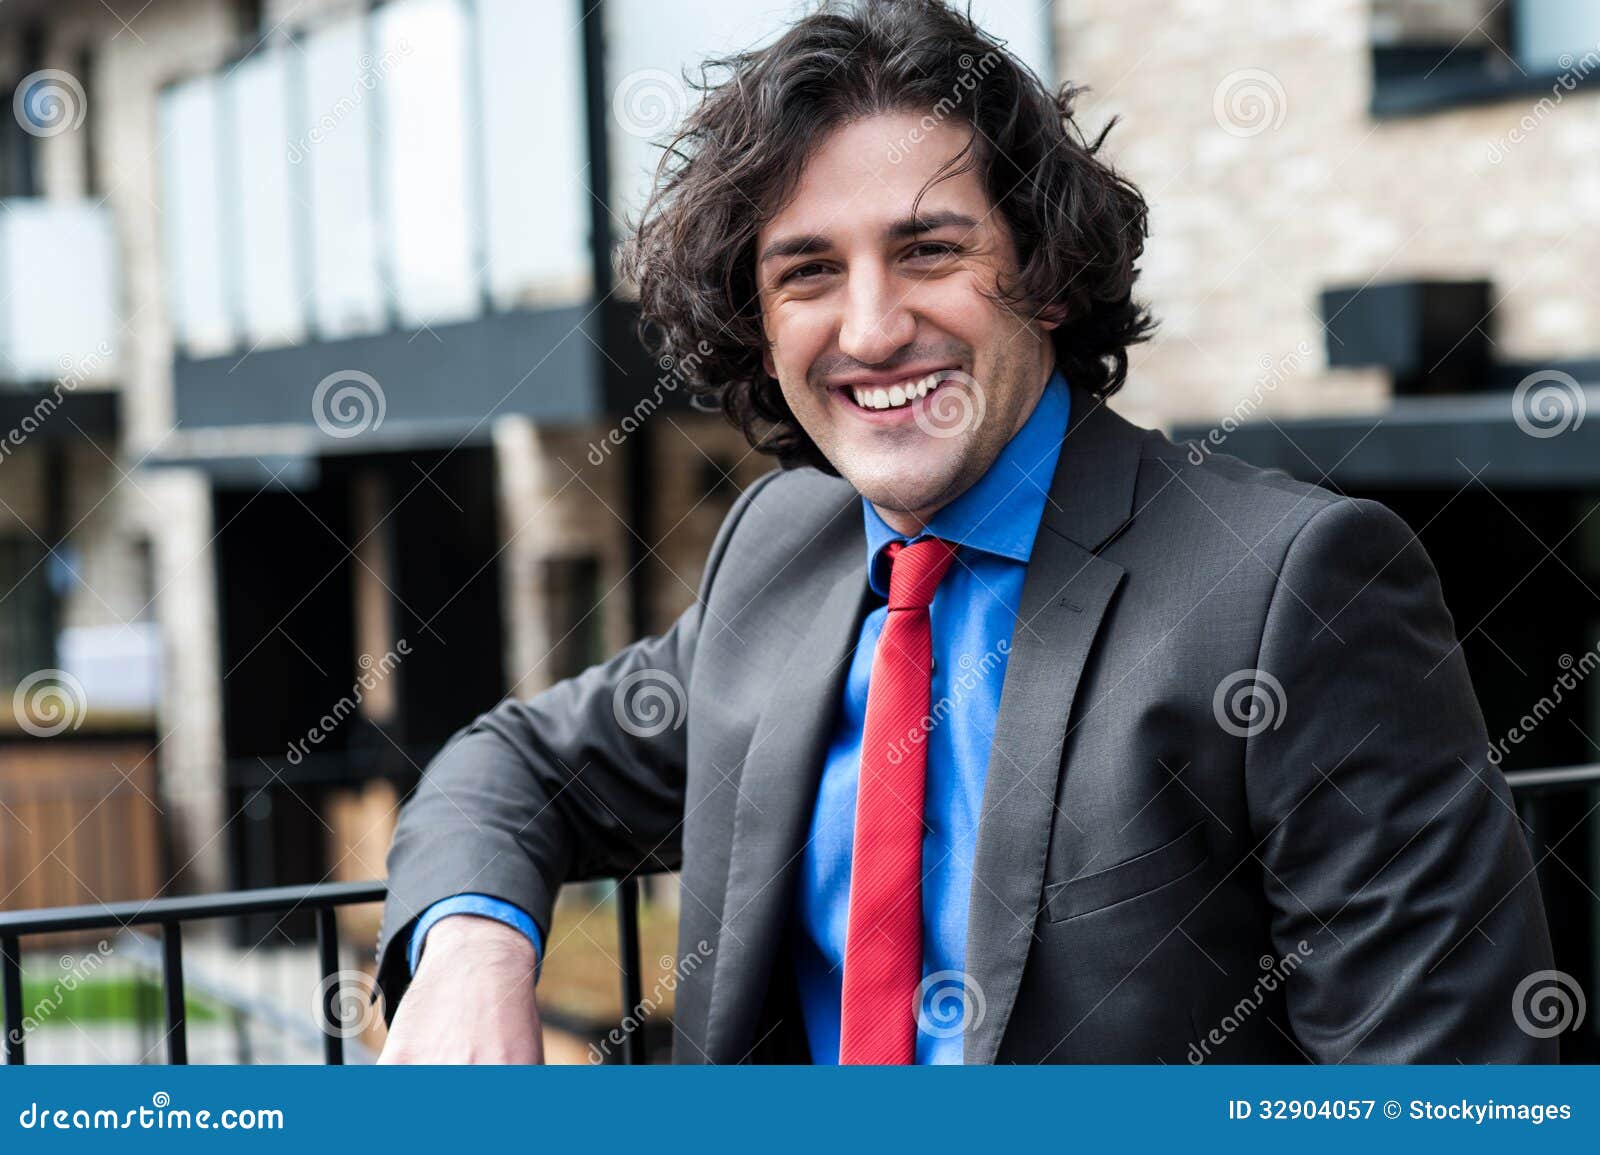 Smart Male Professional Posing Casually, Outdoors Stock Image - Image ...